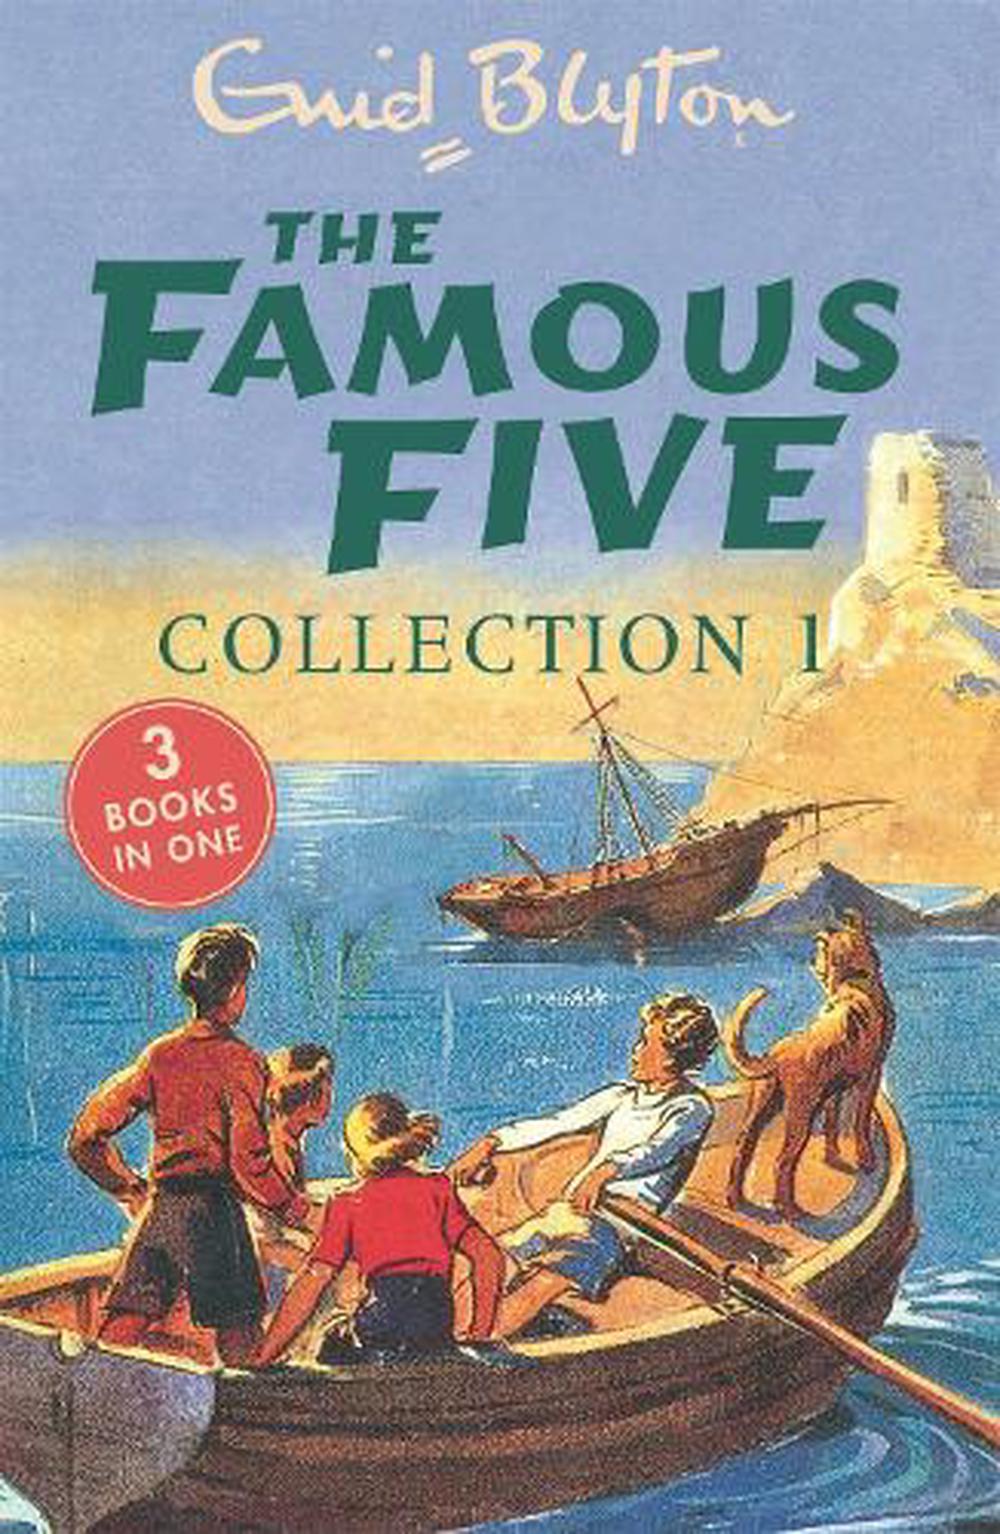 book review on the famous five